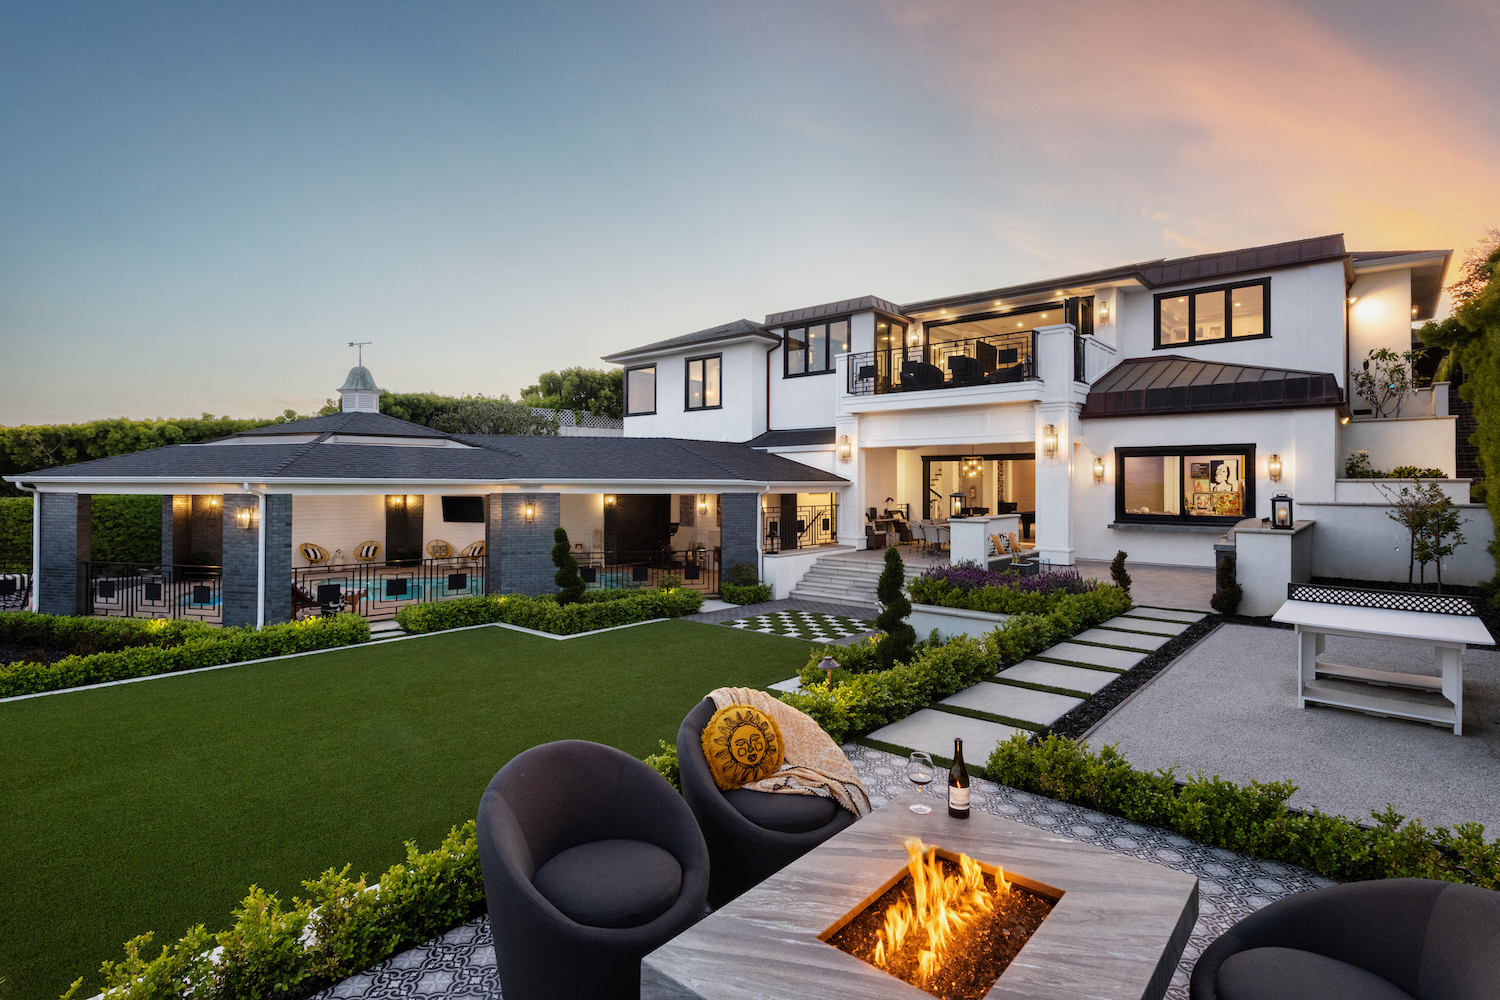 San Diego interior designer Lisa Franco's home featuring a spacious backyard and fire pit